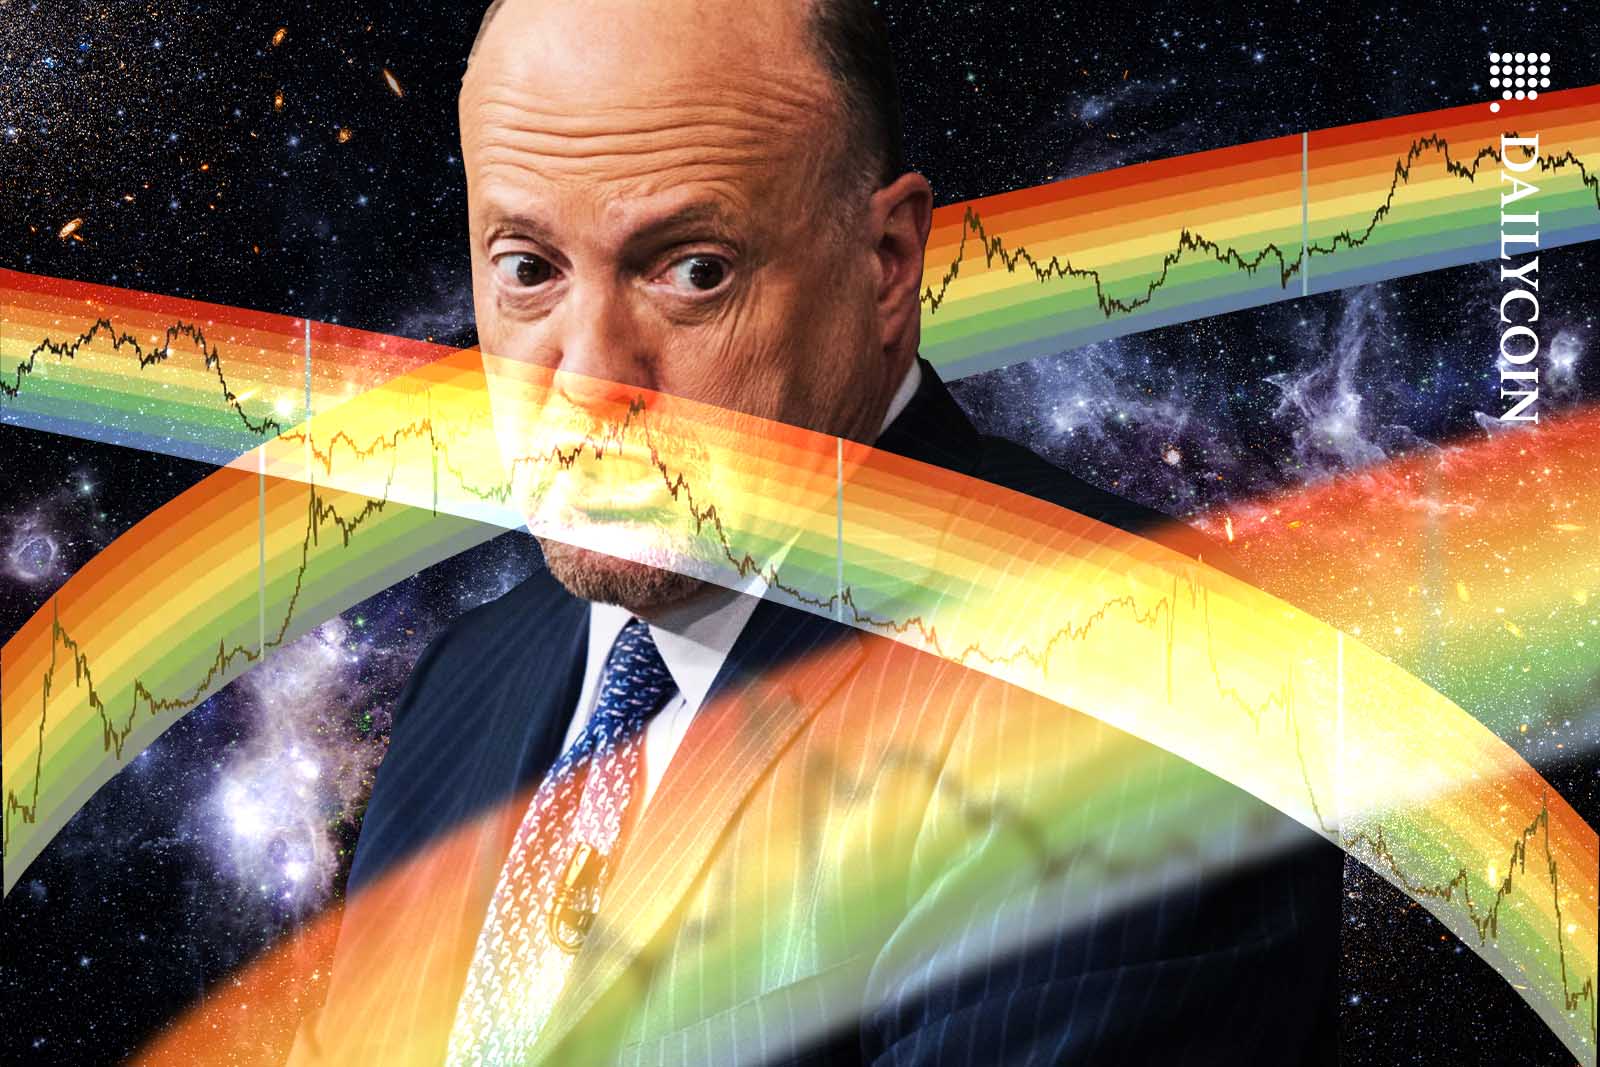 Jim Cramer looks confused surrounded by Bitcoin rainbows.